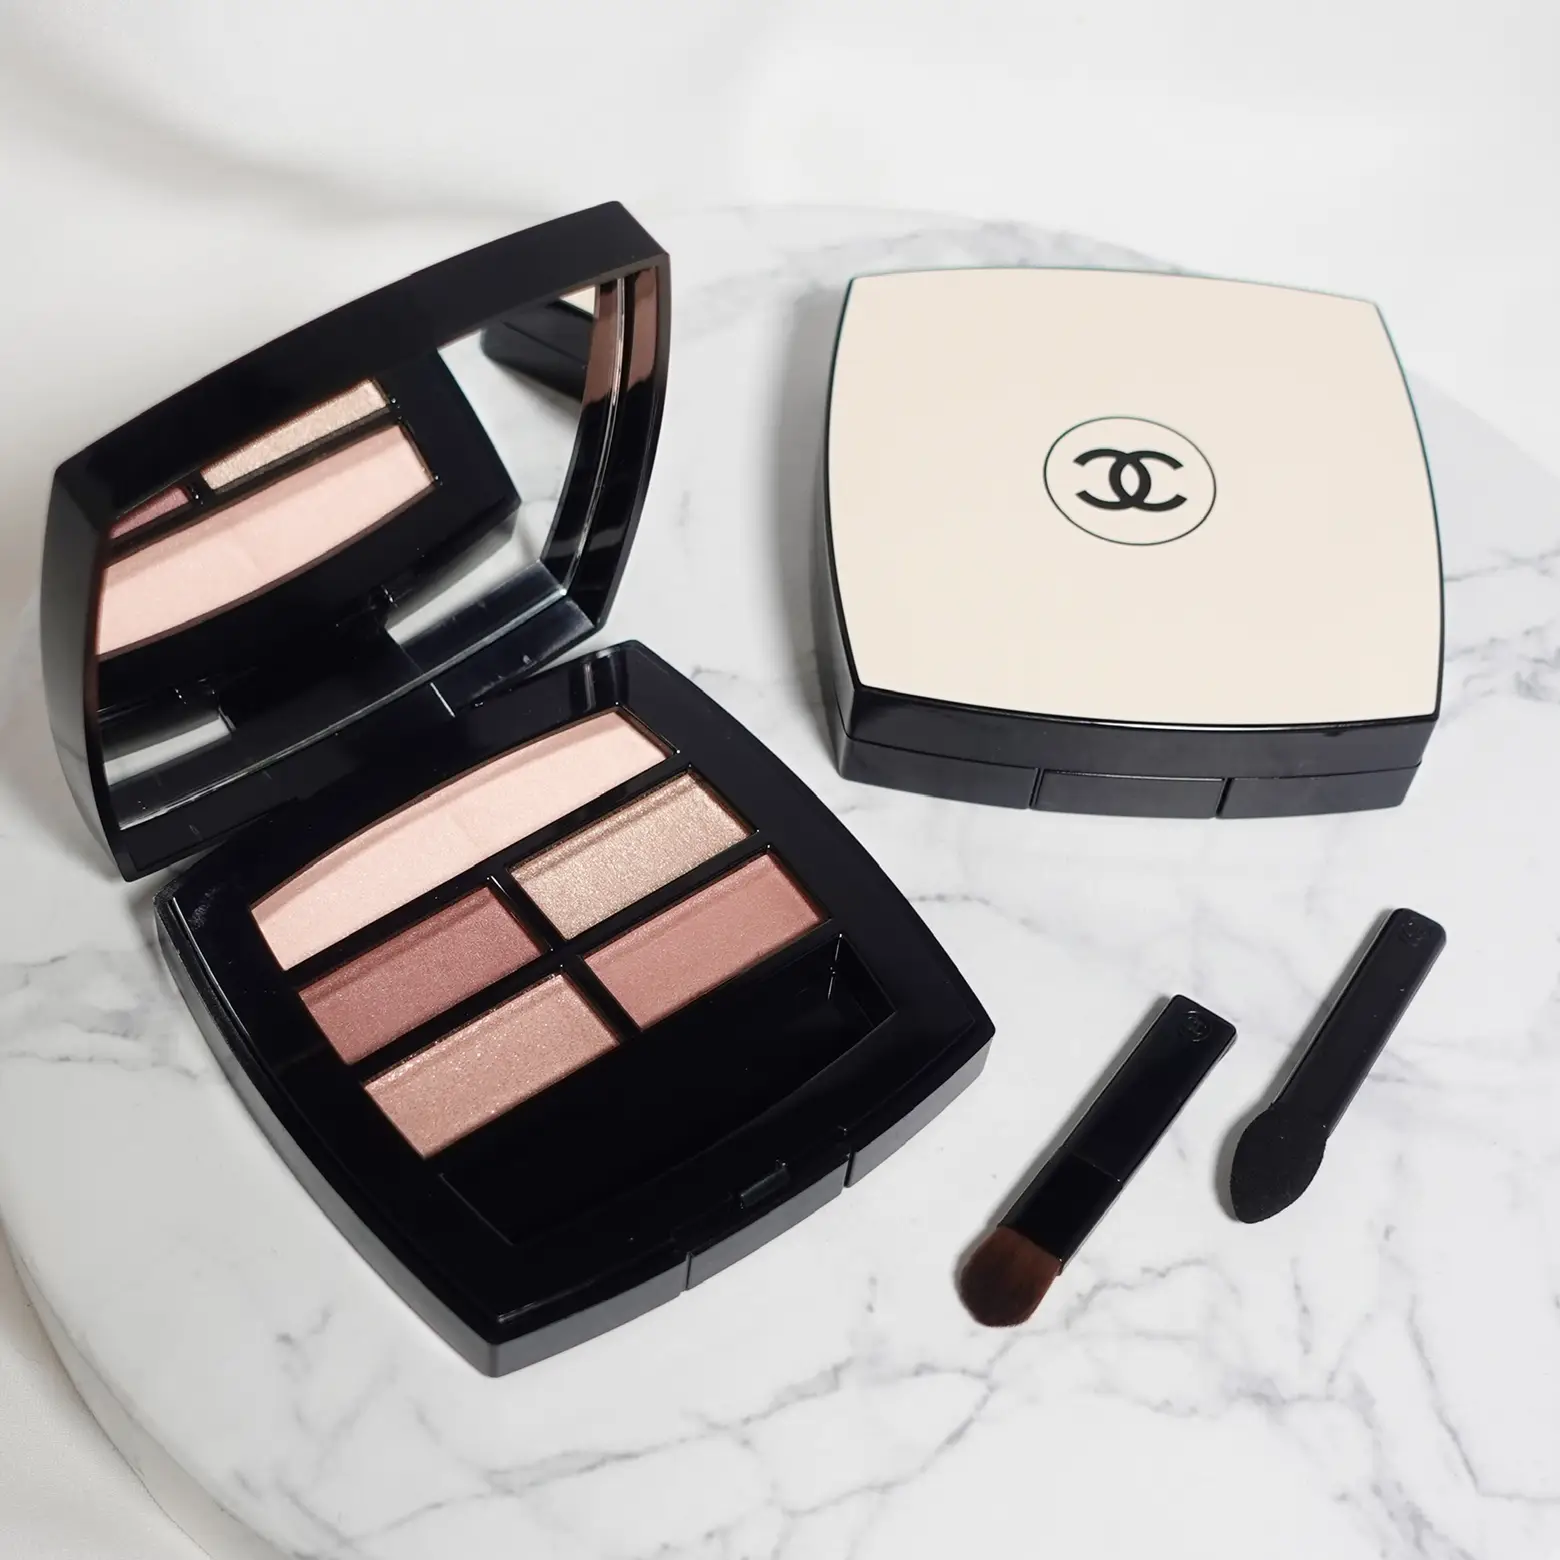 CHANEL Eyeshadow Palette Pink Tone Beautiful Sweet Cute 💖, Gallery posted  by NattapornJade